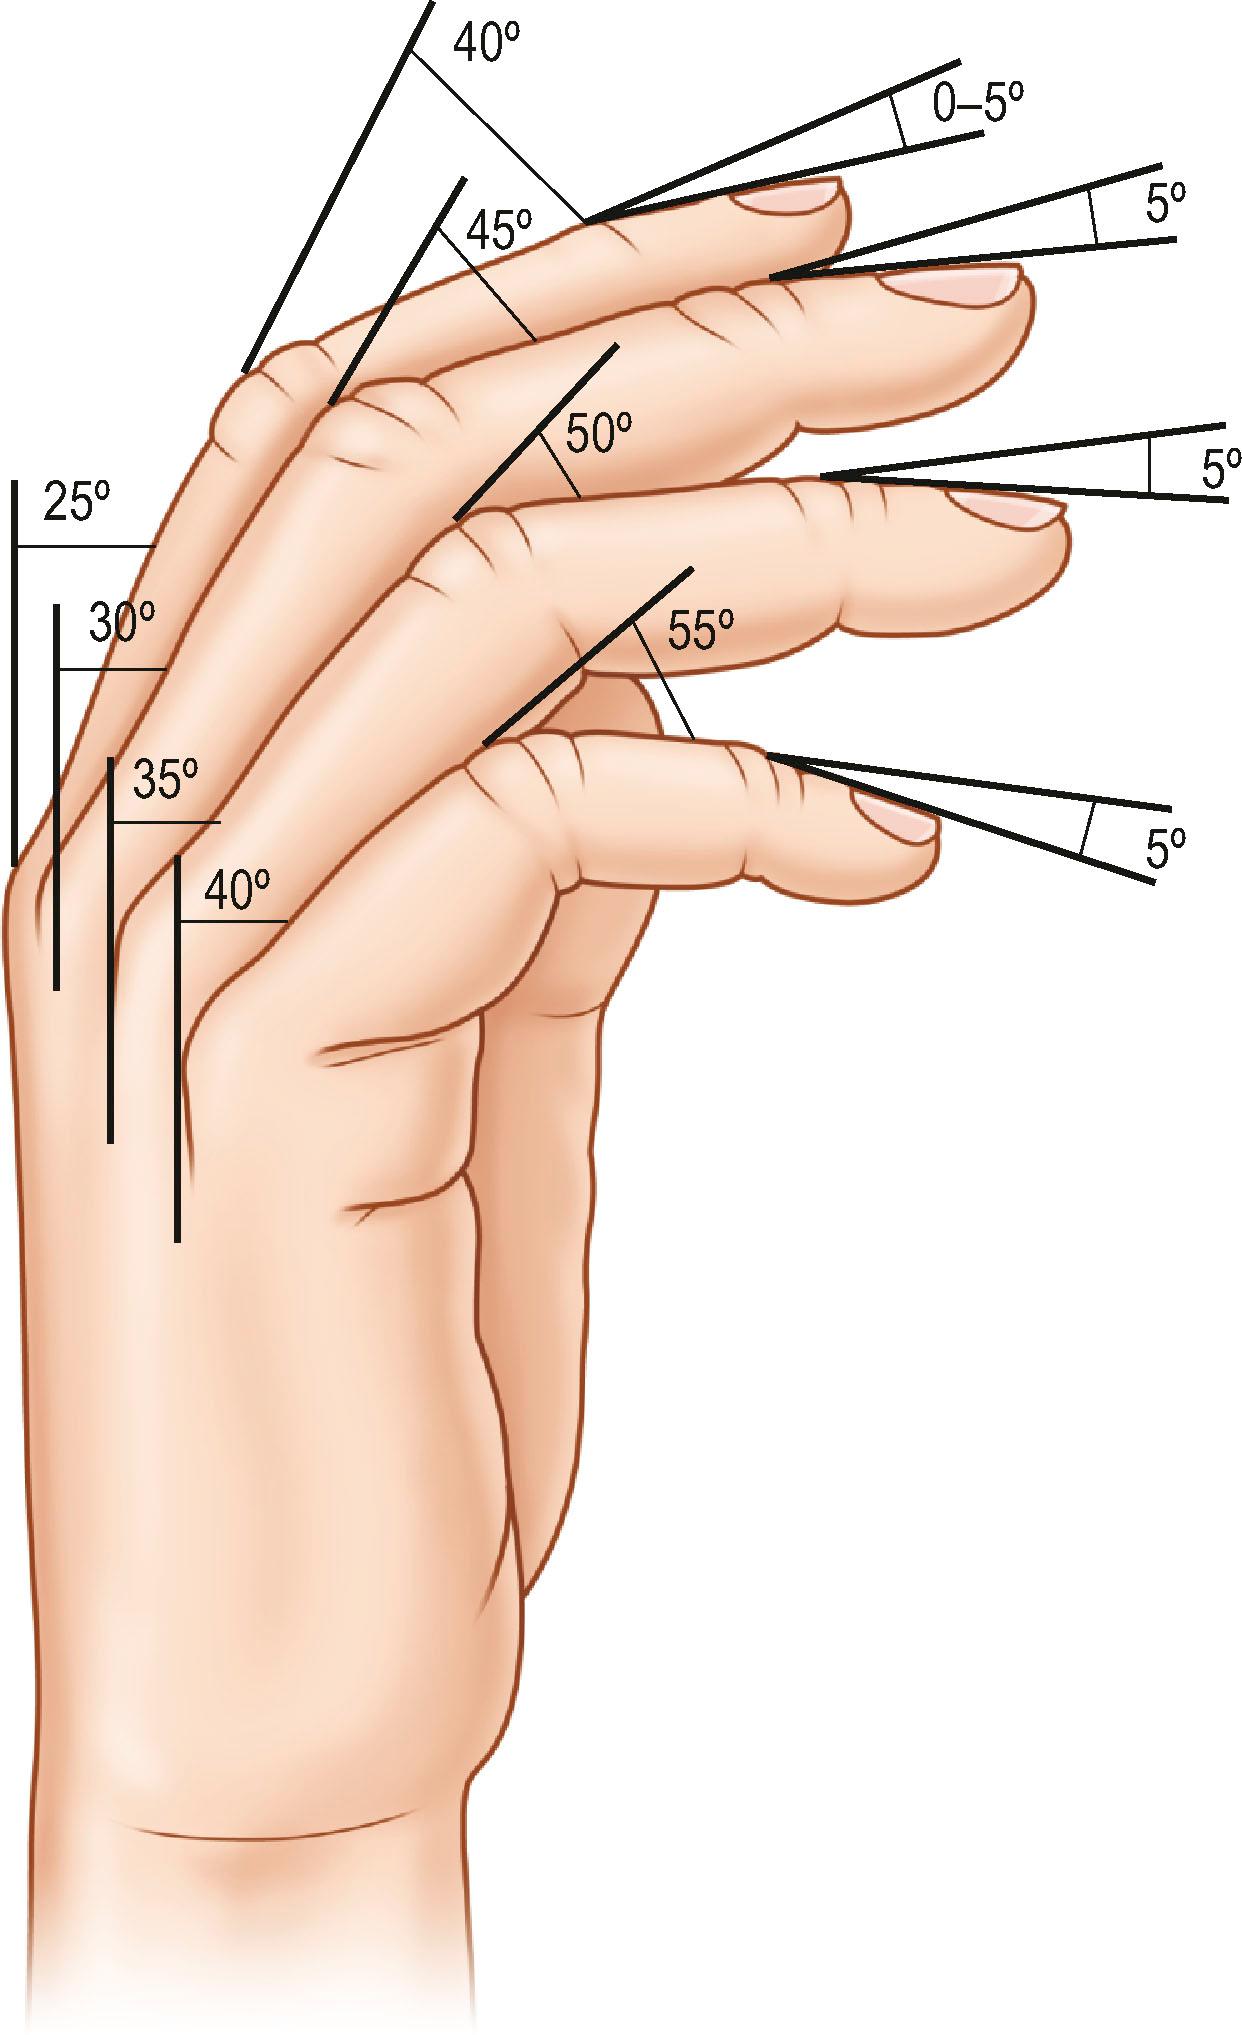 Figure 18.5, Illustration of recommended fusion angles for DIP, PIP, and MCP joints. DIP fusion angles are often performed with 0–15° of flexion. PIP fusion angles increase as one moves from the index to the small finger, to correspond with the natural cascade of the hand. Recommended fusion angles for the PIP joint have been 40° of flexion for the index, 45° for the long, 50° of flexion for the ring and 55° of flexion for the small finger. MCP fusion angles have been recommended to progress from 25° of flexion at the index to 40° of flexion at the small finger.